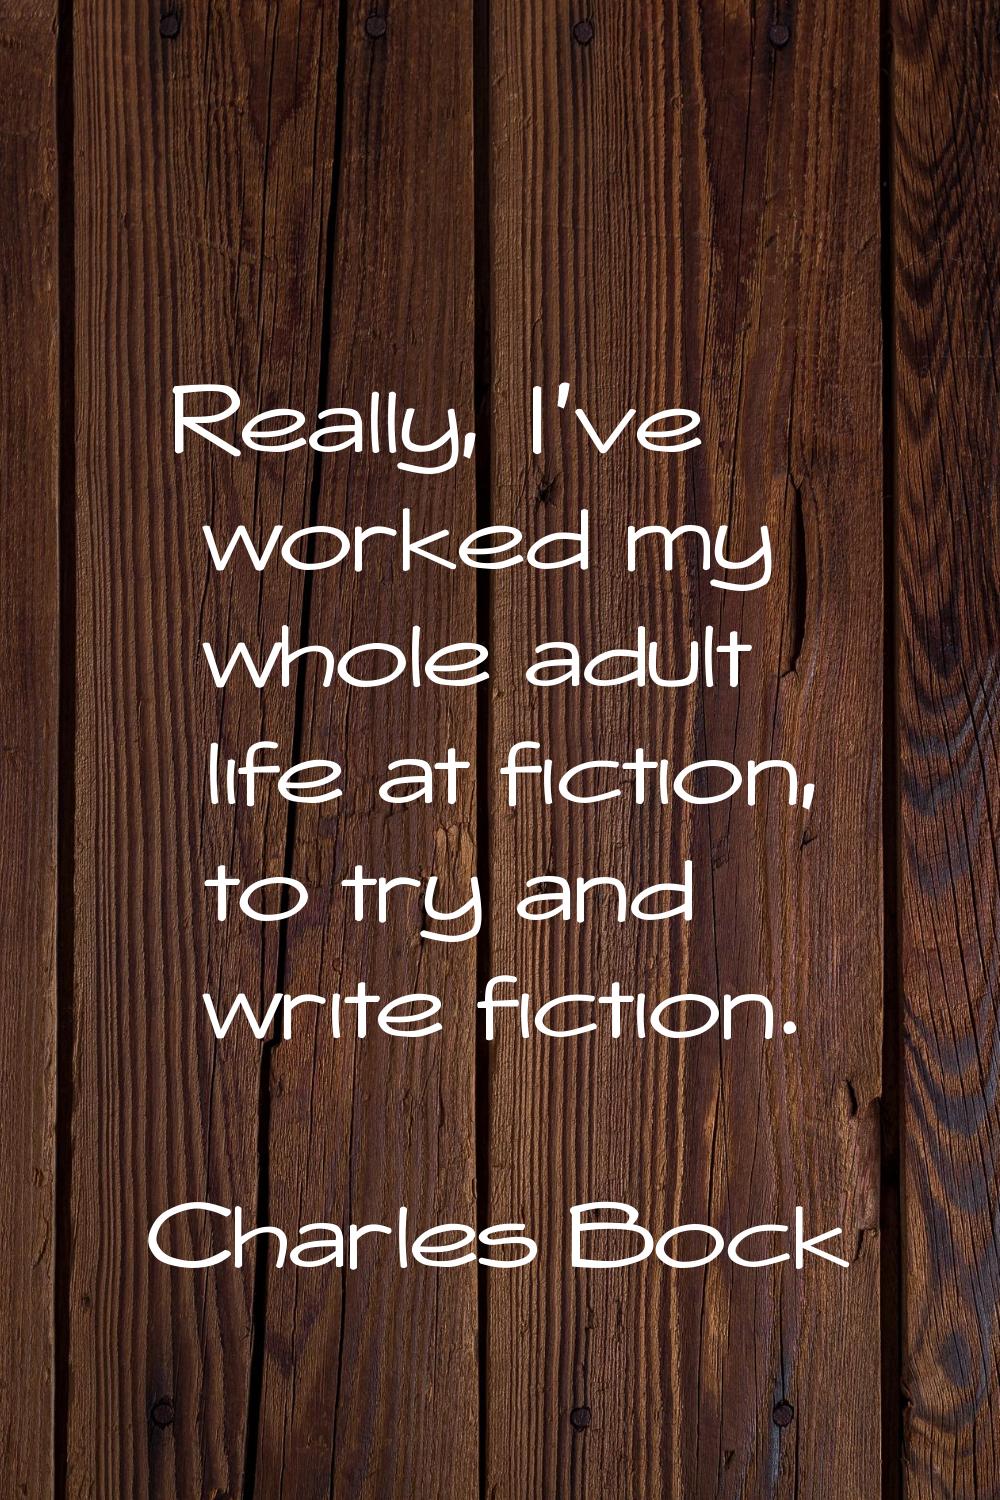 Really, I've worked my whole adult life at fiction, to try and write fiction.